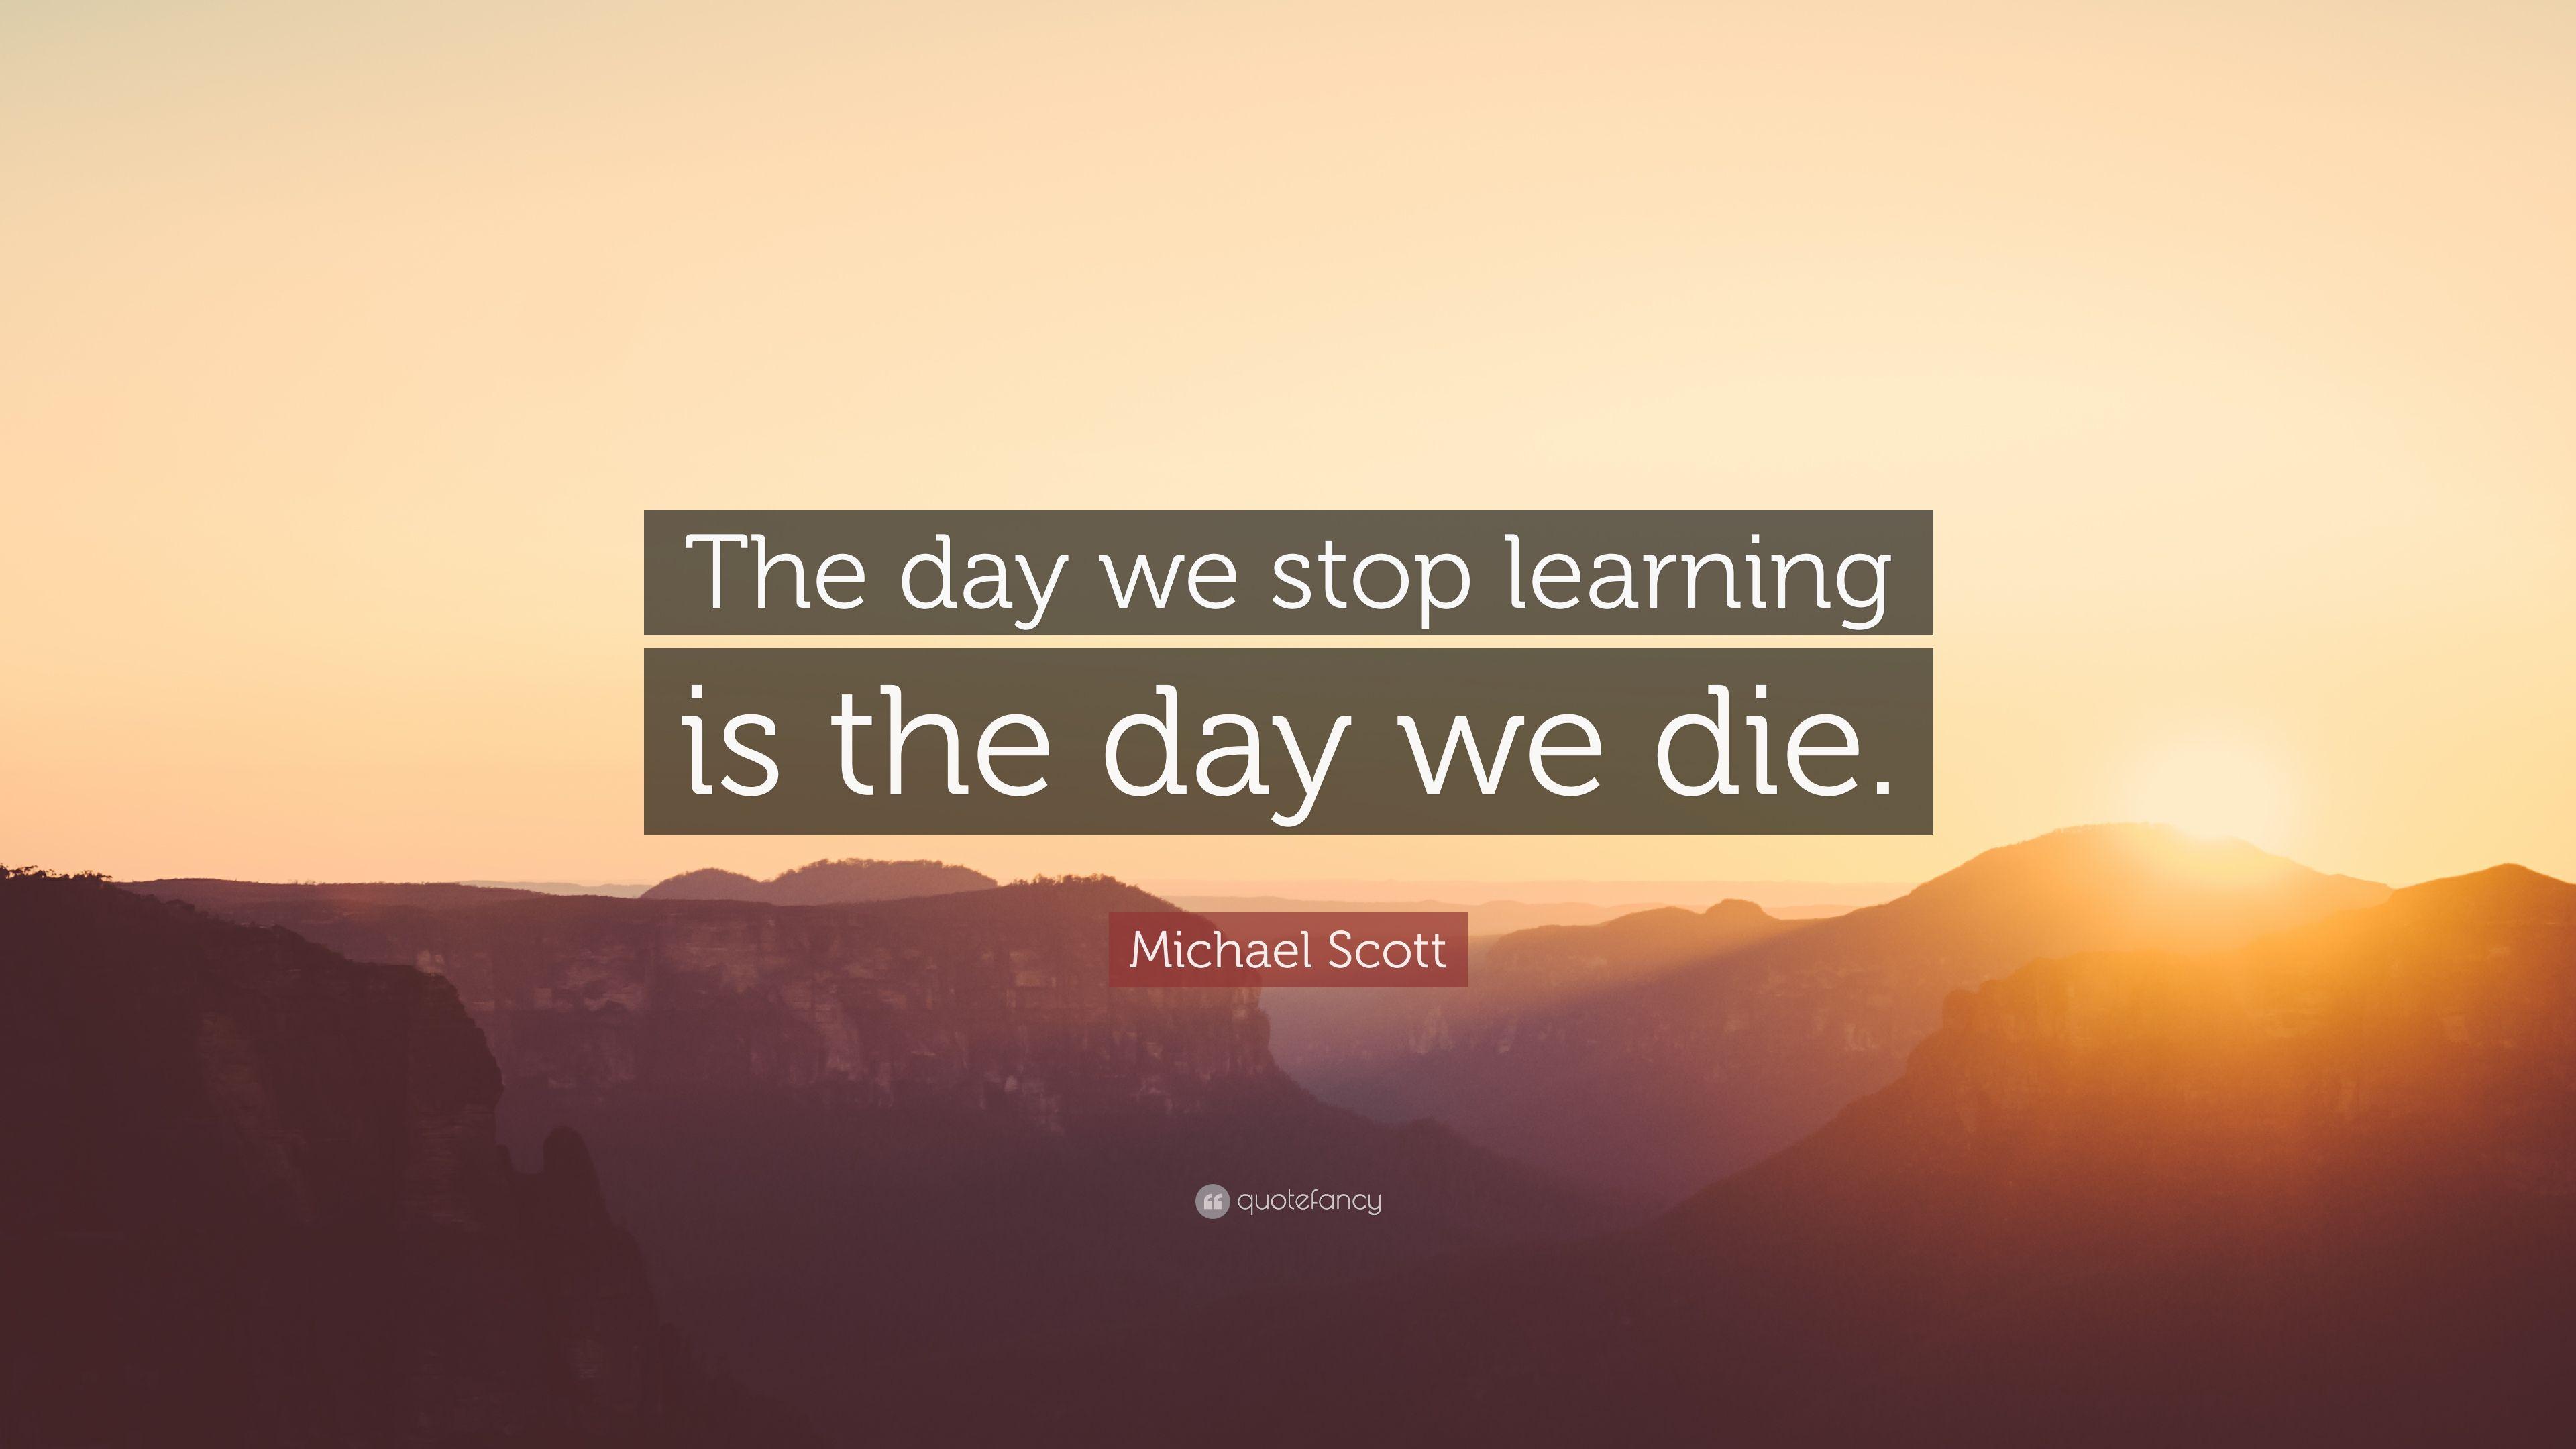 Michael Scott Quote: “The day we stop learning is the day we die